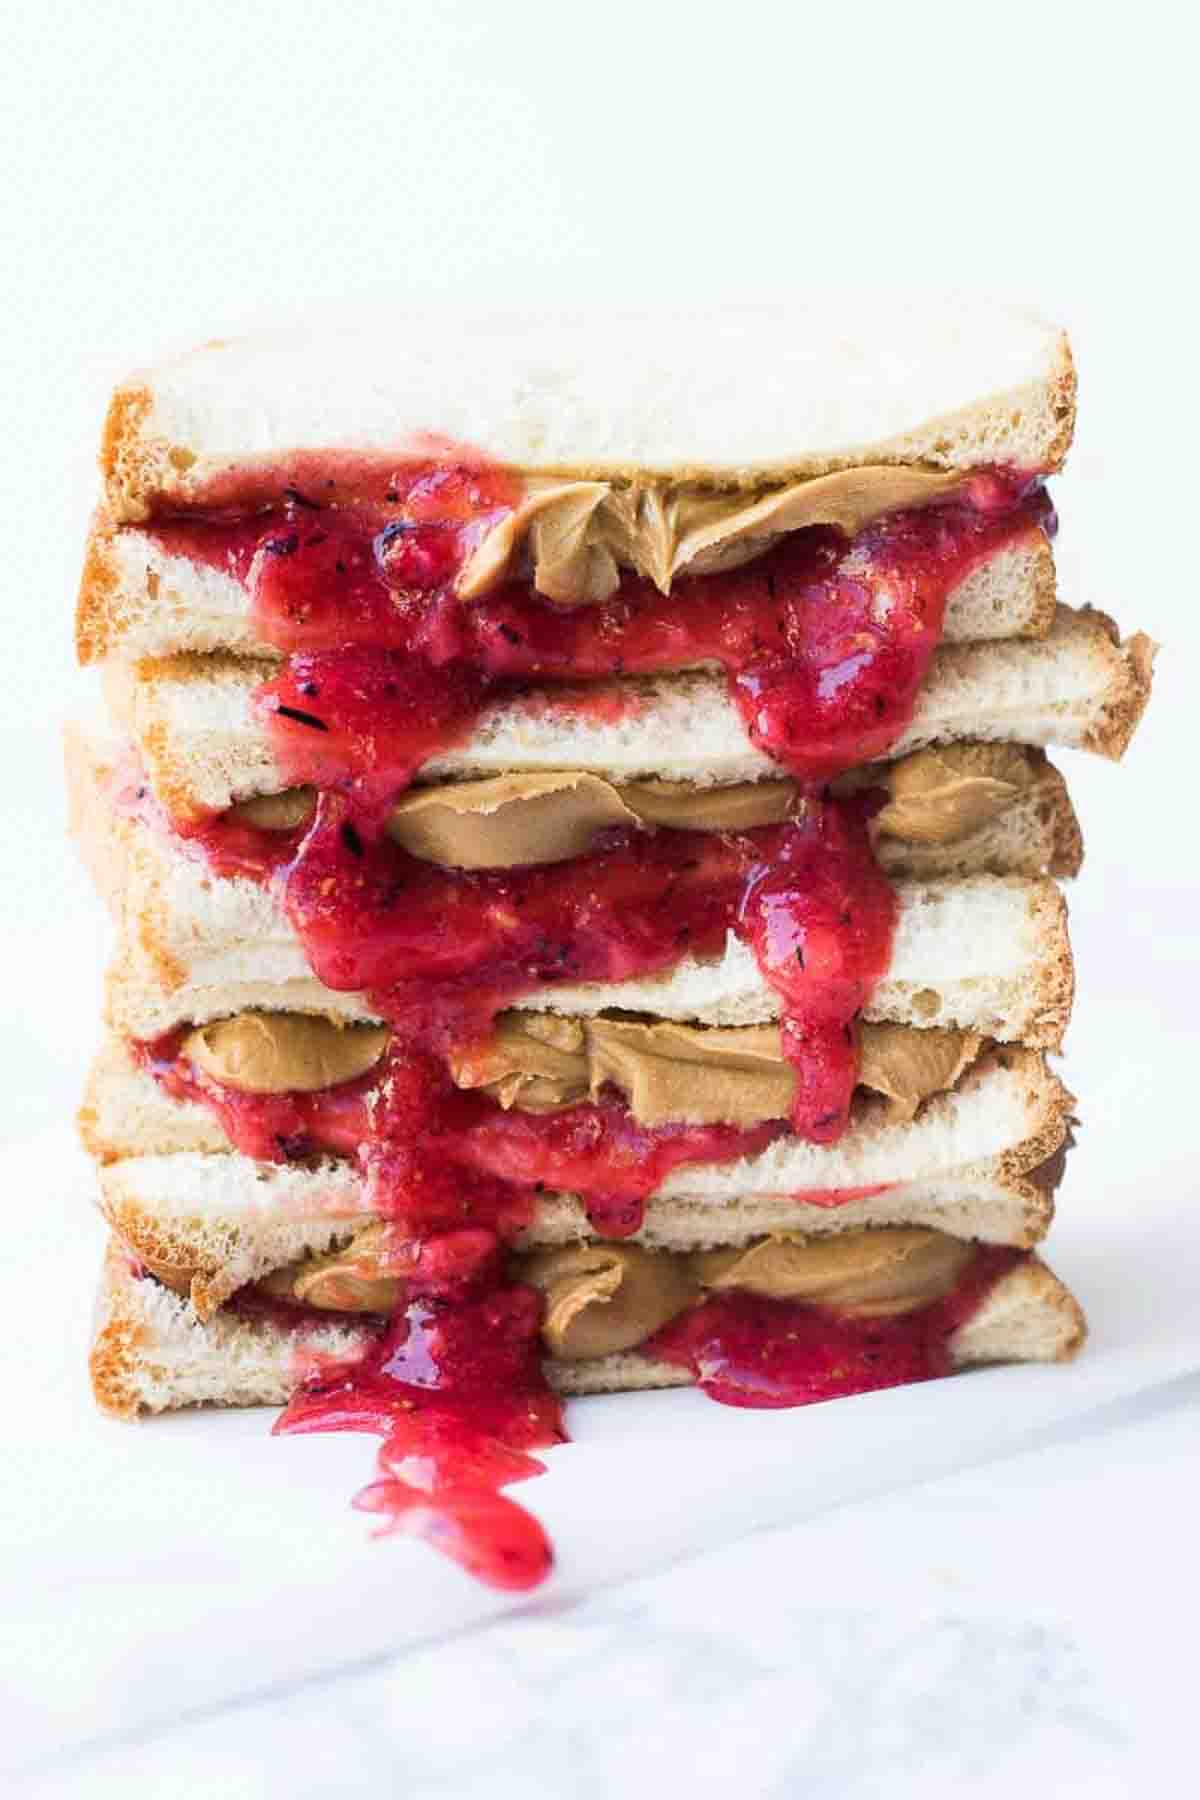 A stack of homemade jam and peanut butter sandwiches